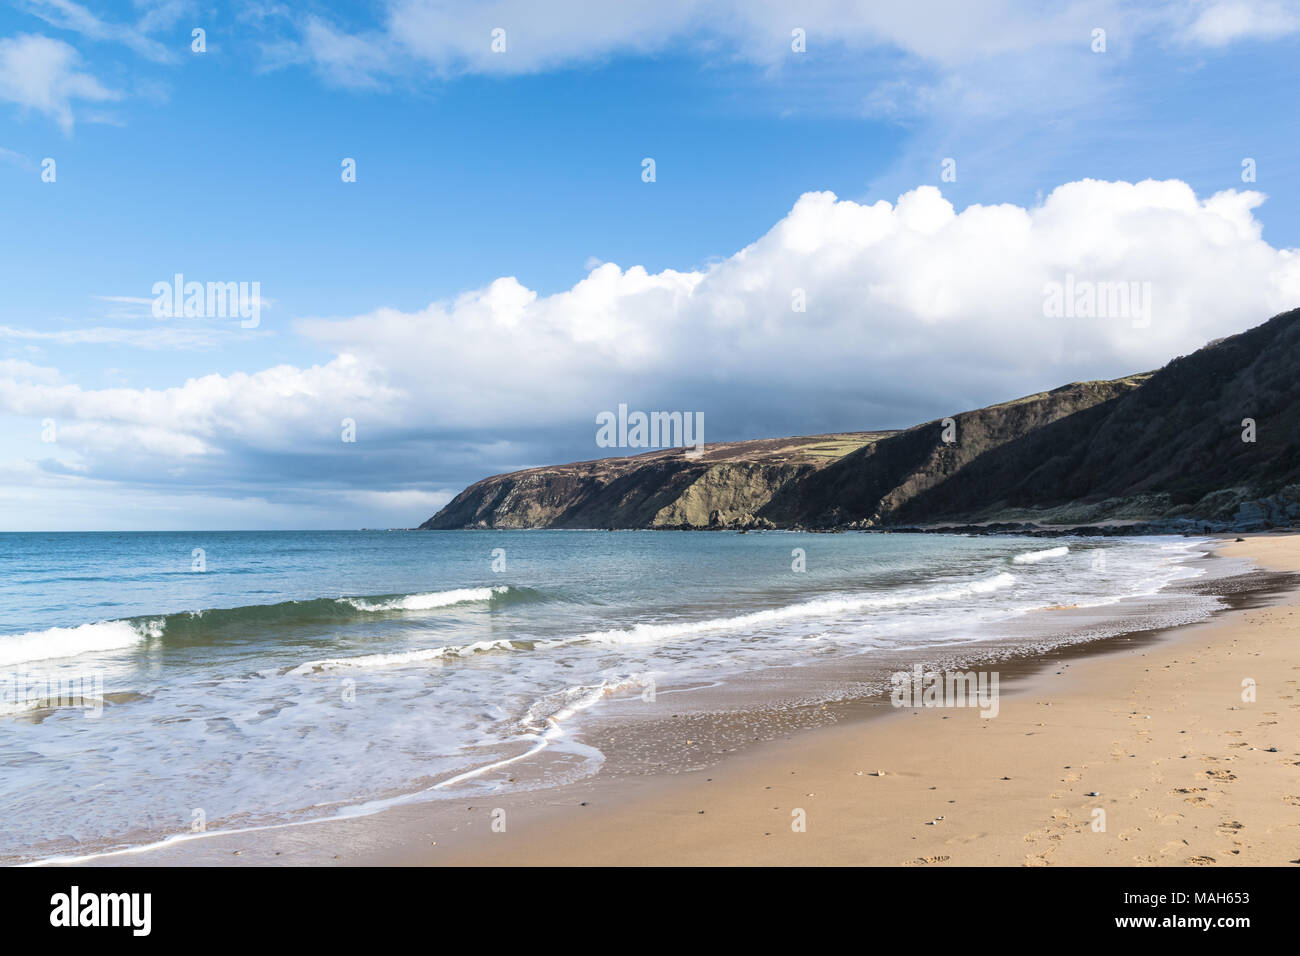 White sandy beach in Ireland with turquoise water and blue sky. This is Kinnagoe Bay in Donegal Ireland Stock Photo